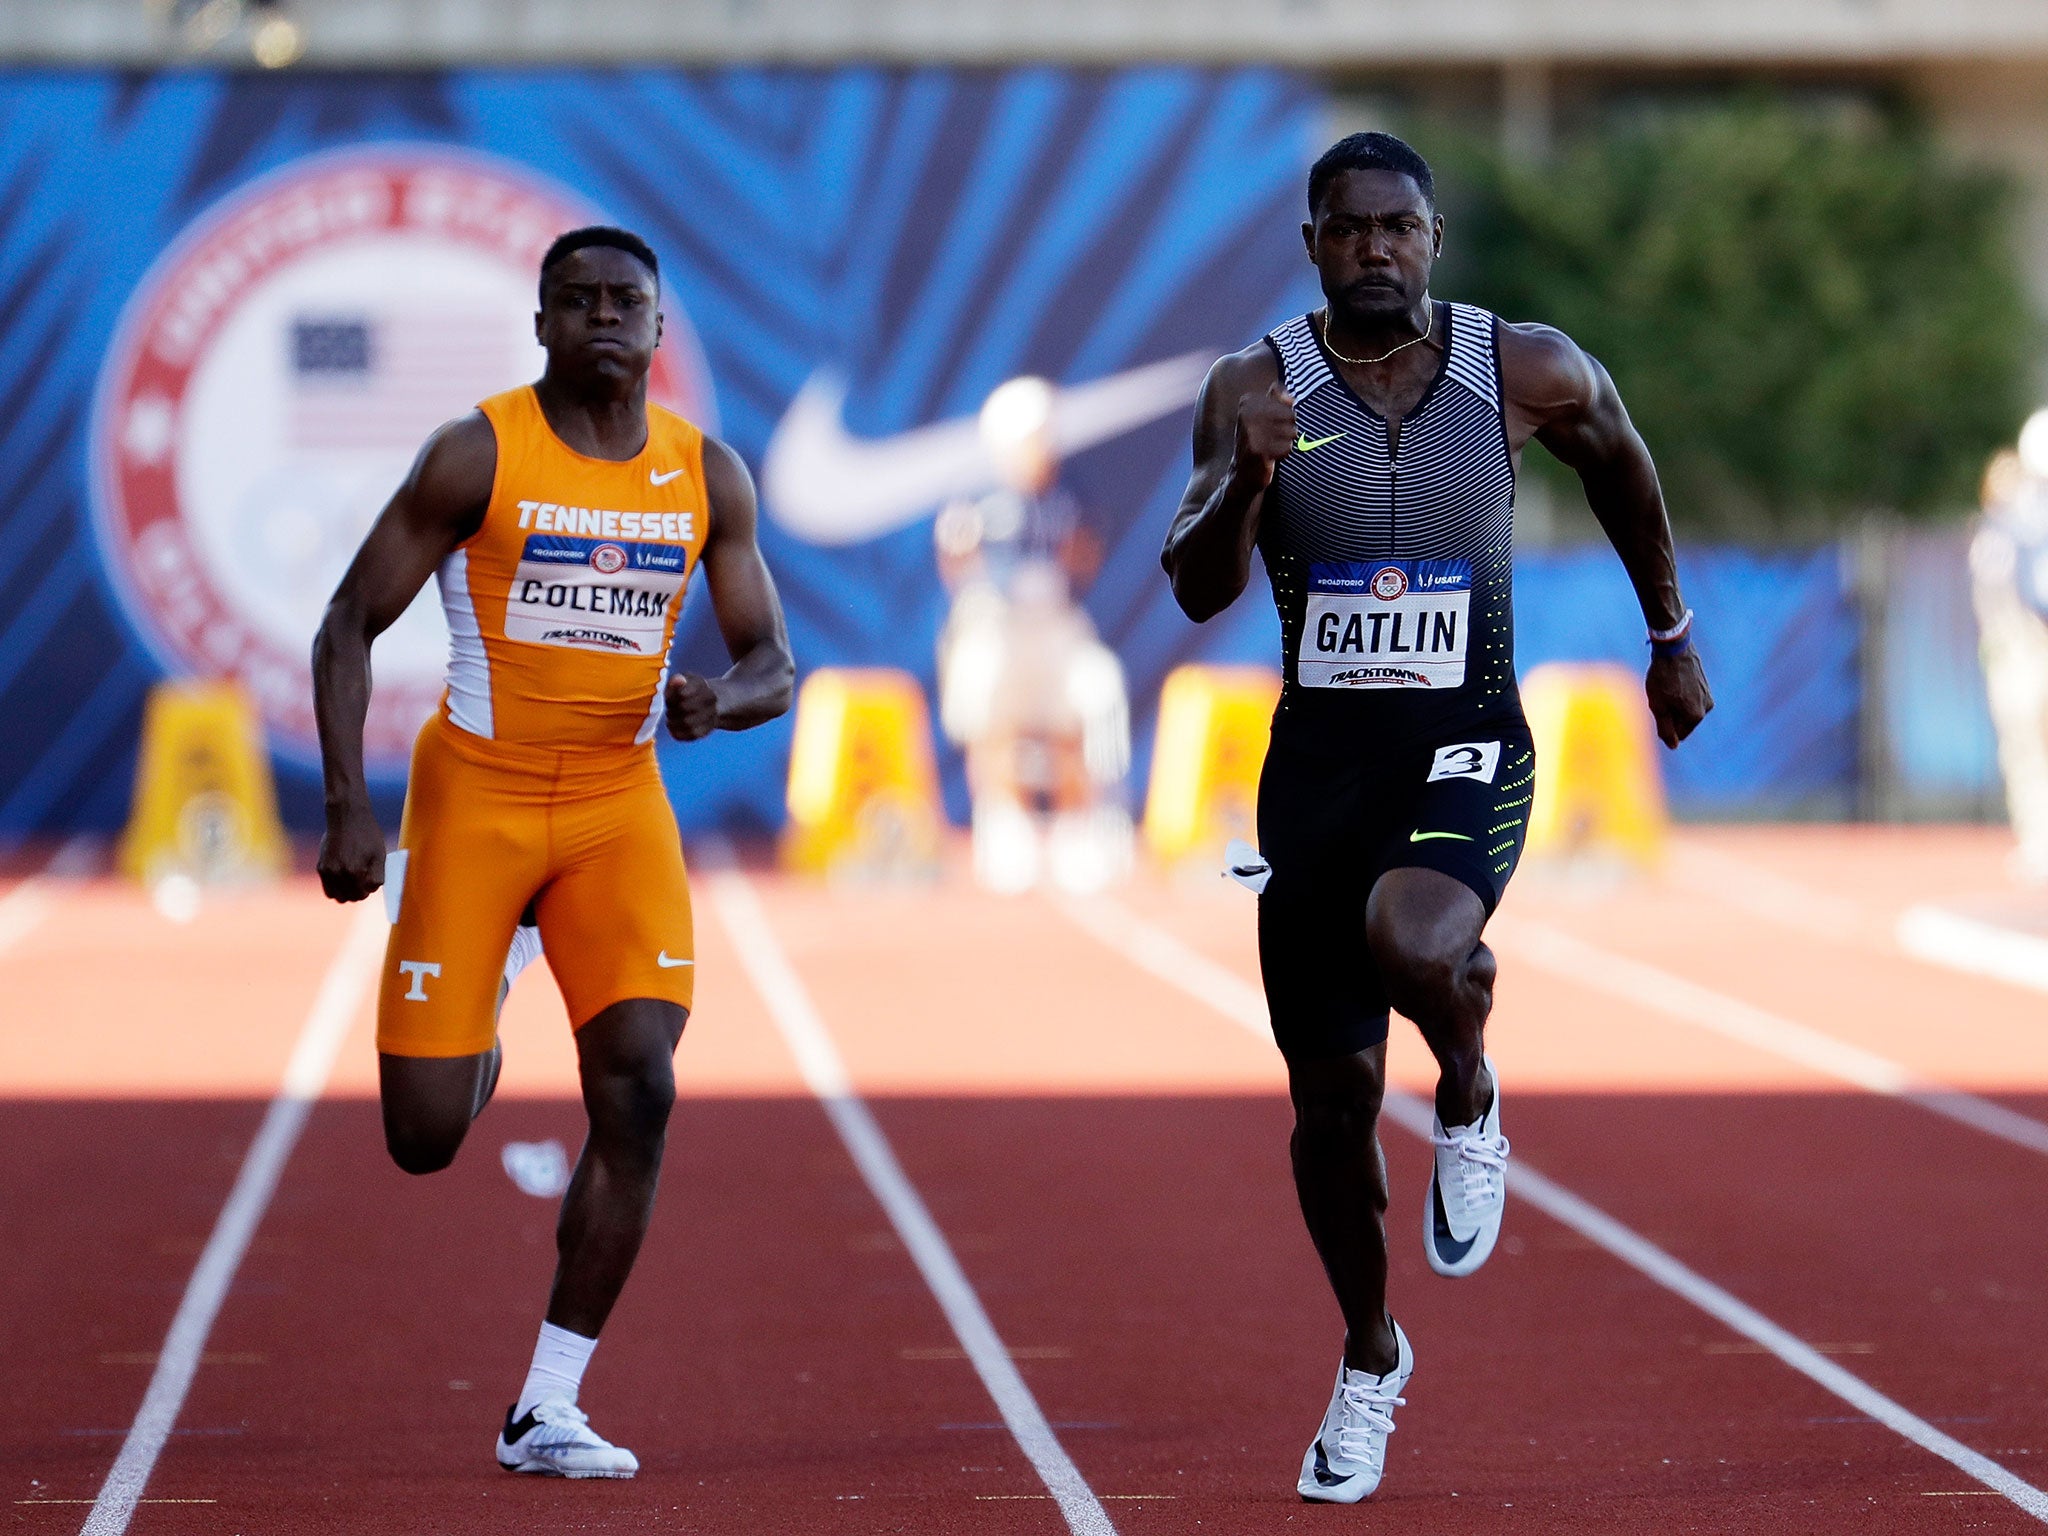 Christian Coleman (left) at the 2016 USA Olympic Track and Field team trials